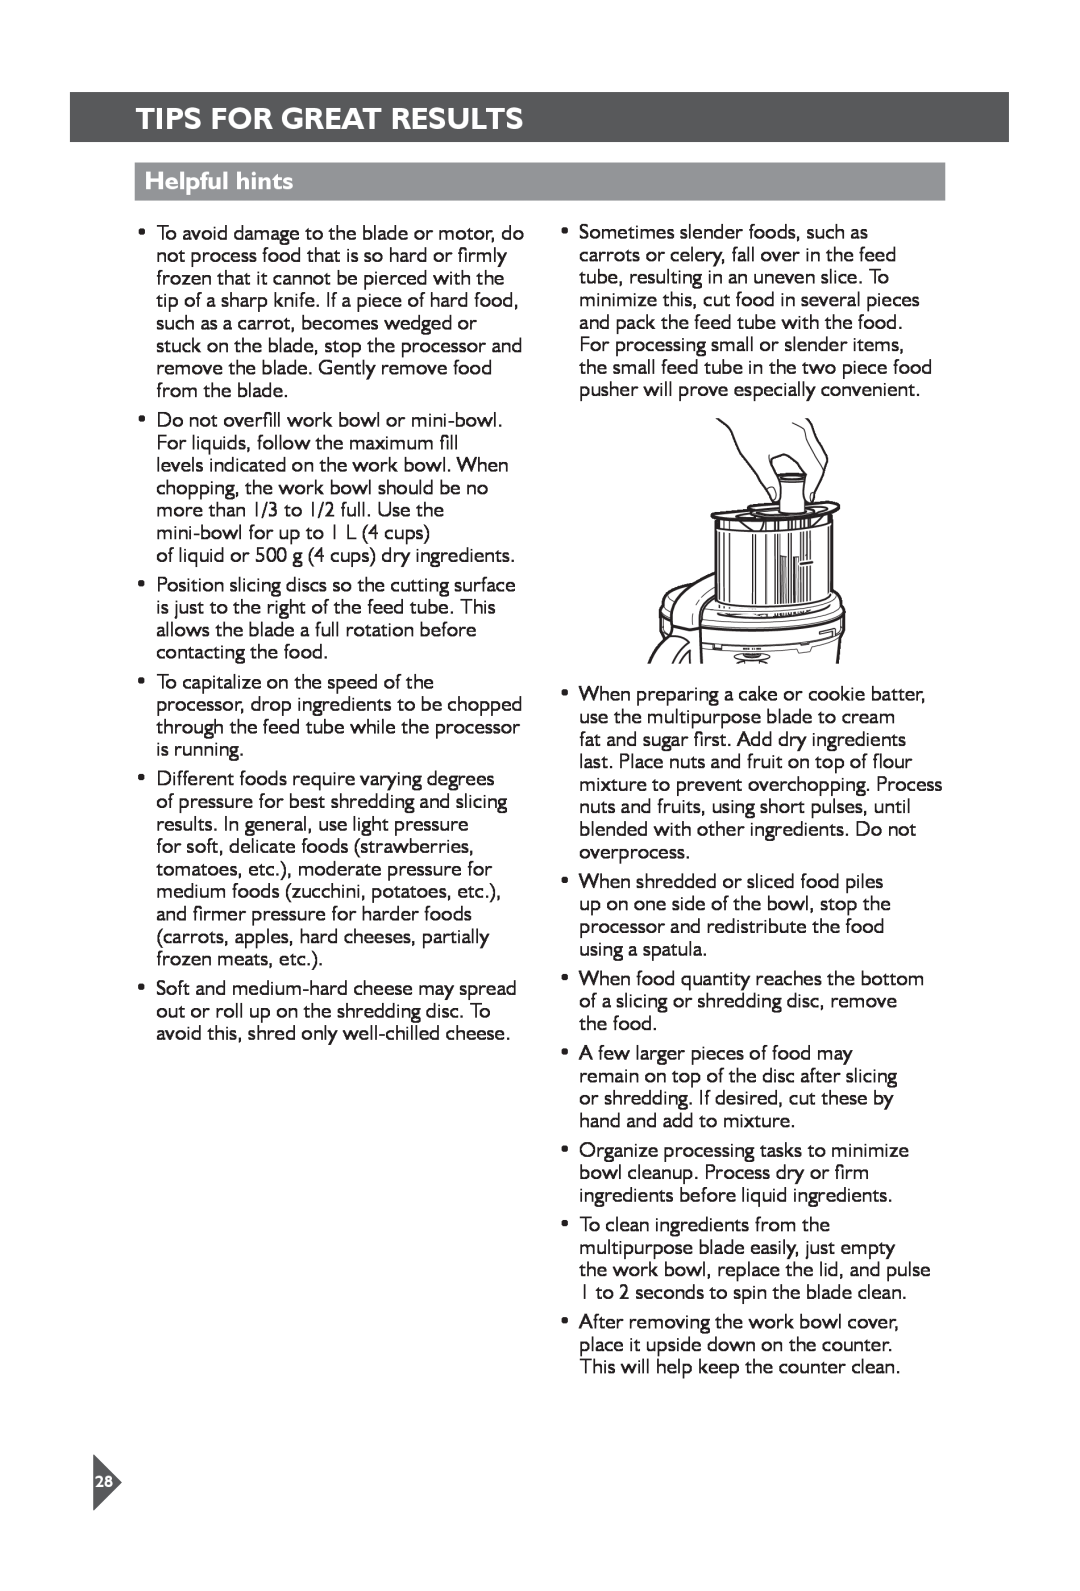 KitchenAid 5KFP1644 manual Helpful hints, Tips For Great Results 